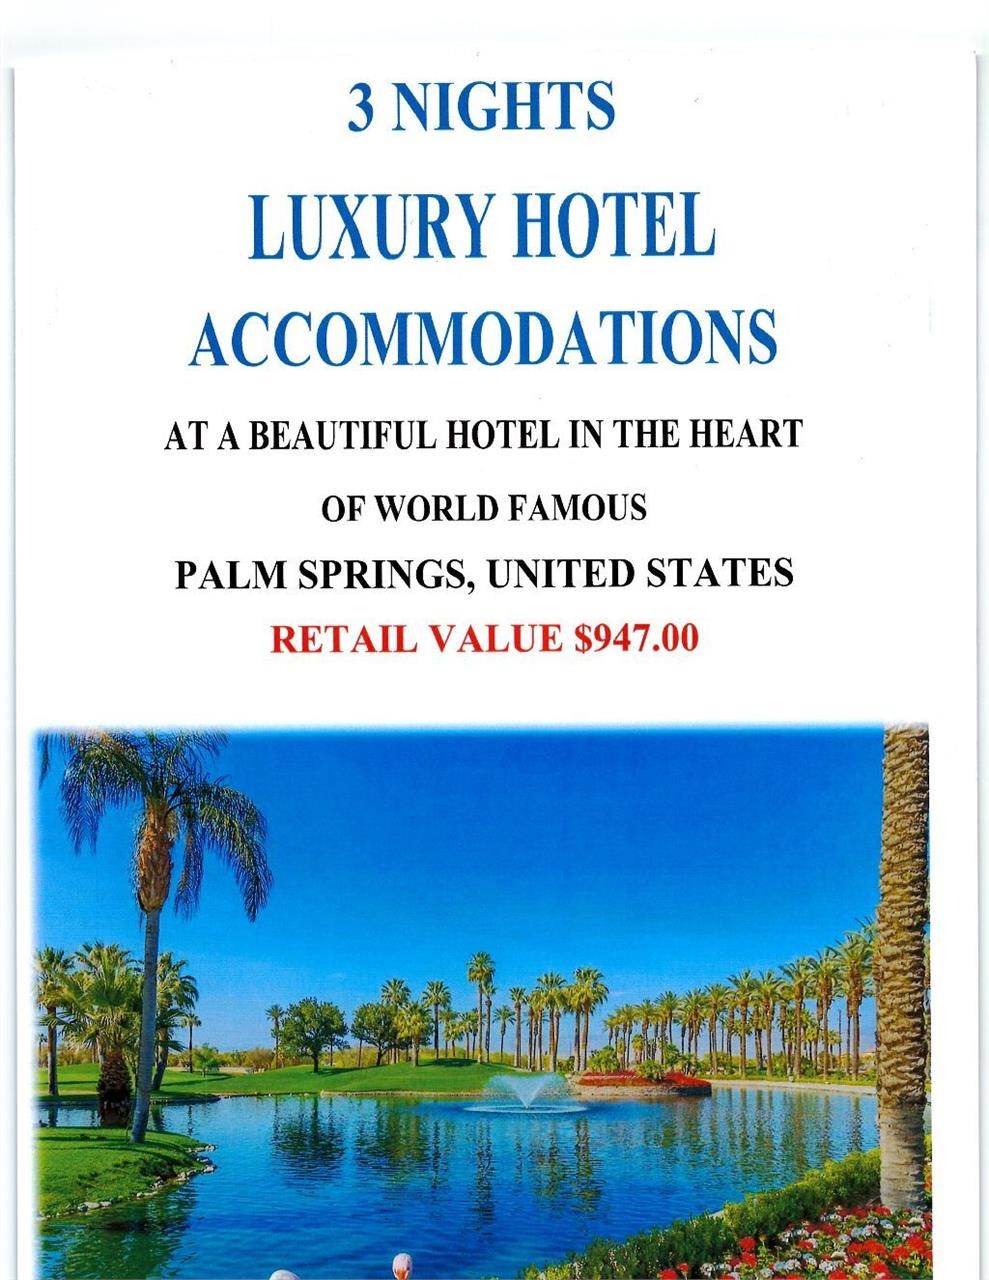 MAY 16TH. Vacation Hotel Accommodation Packages Auction